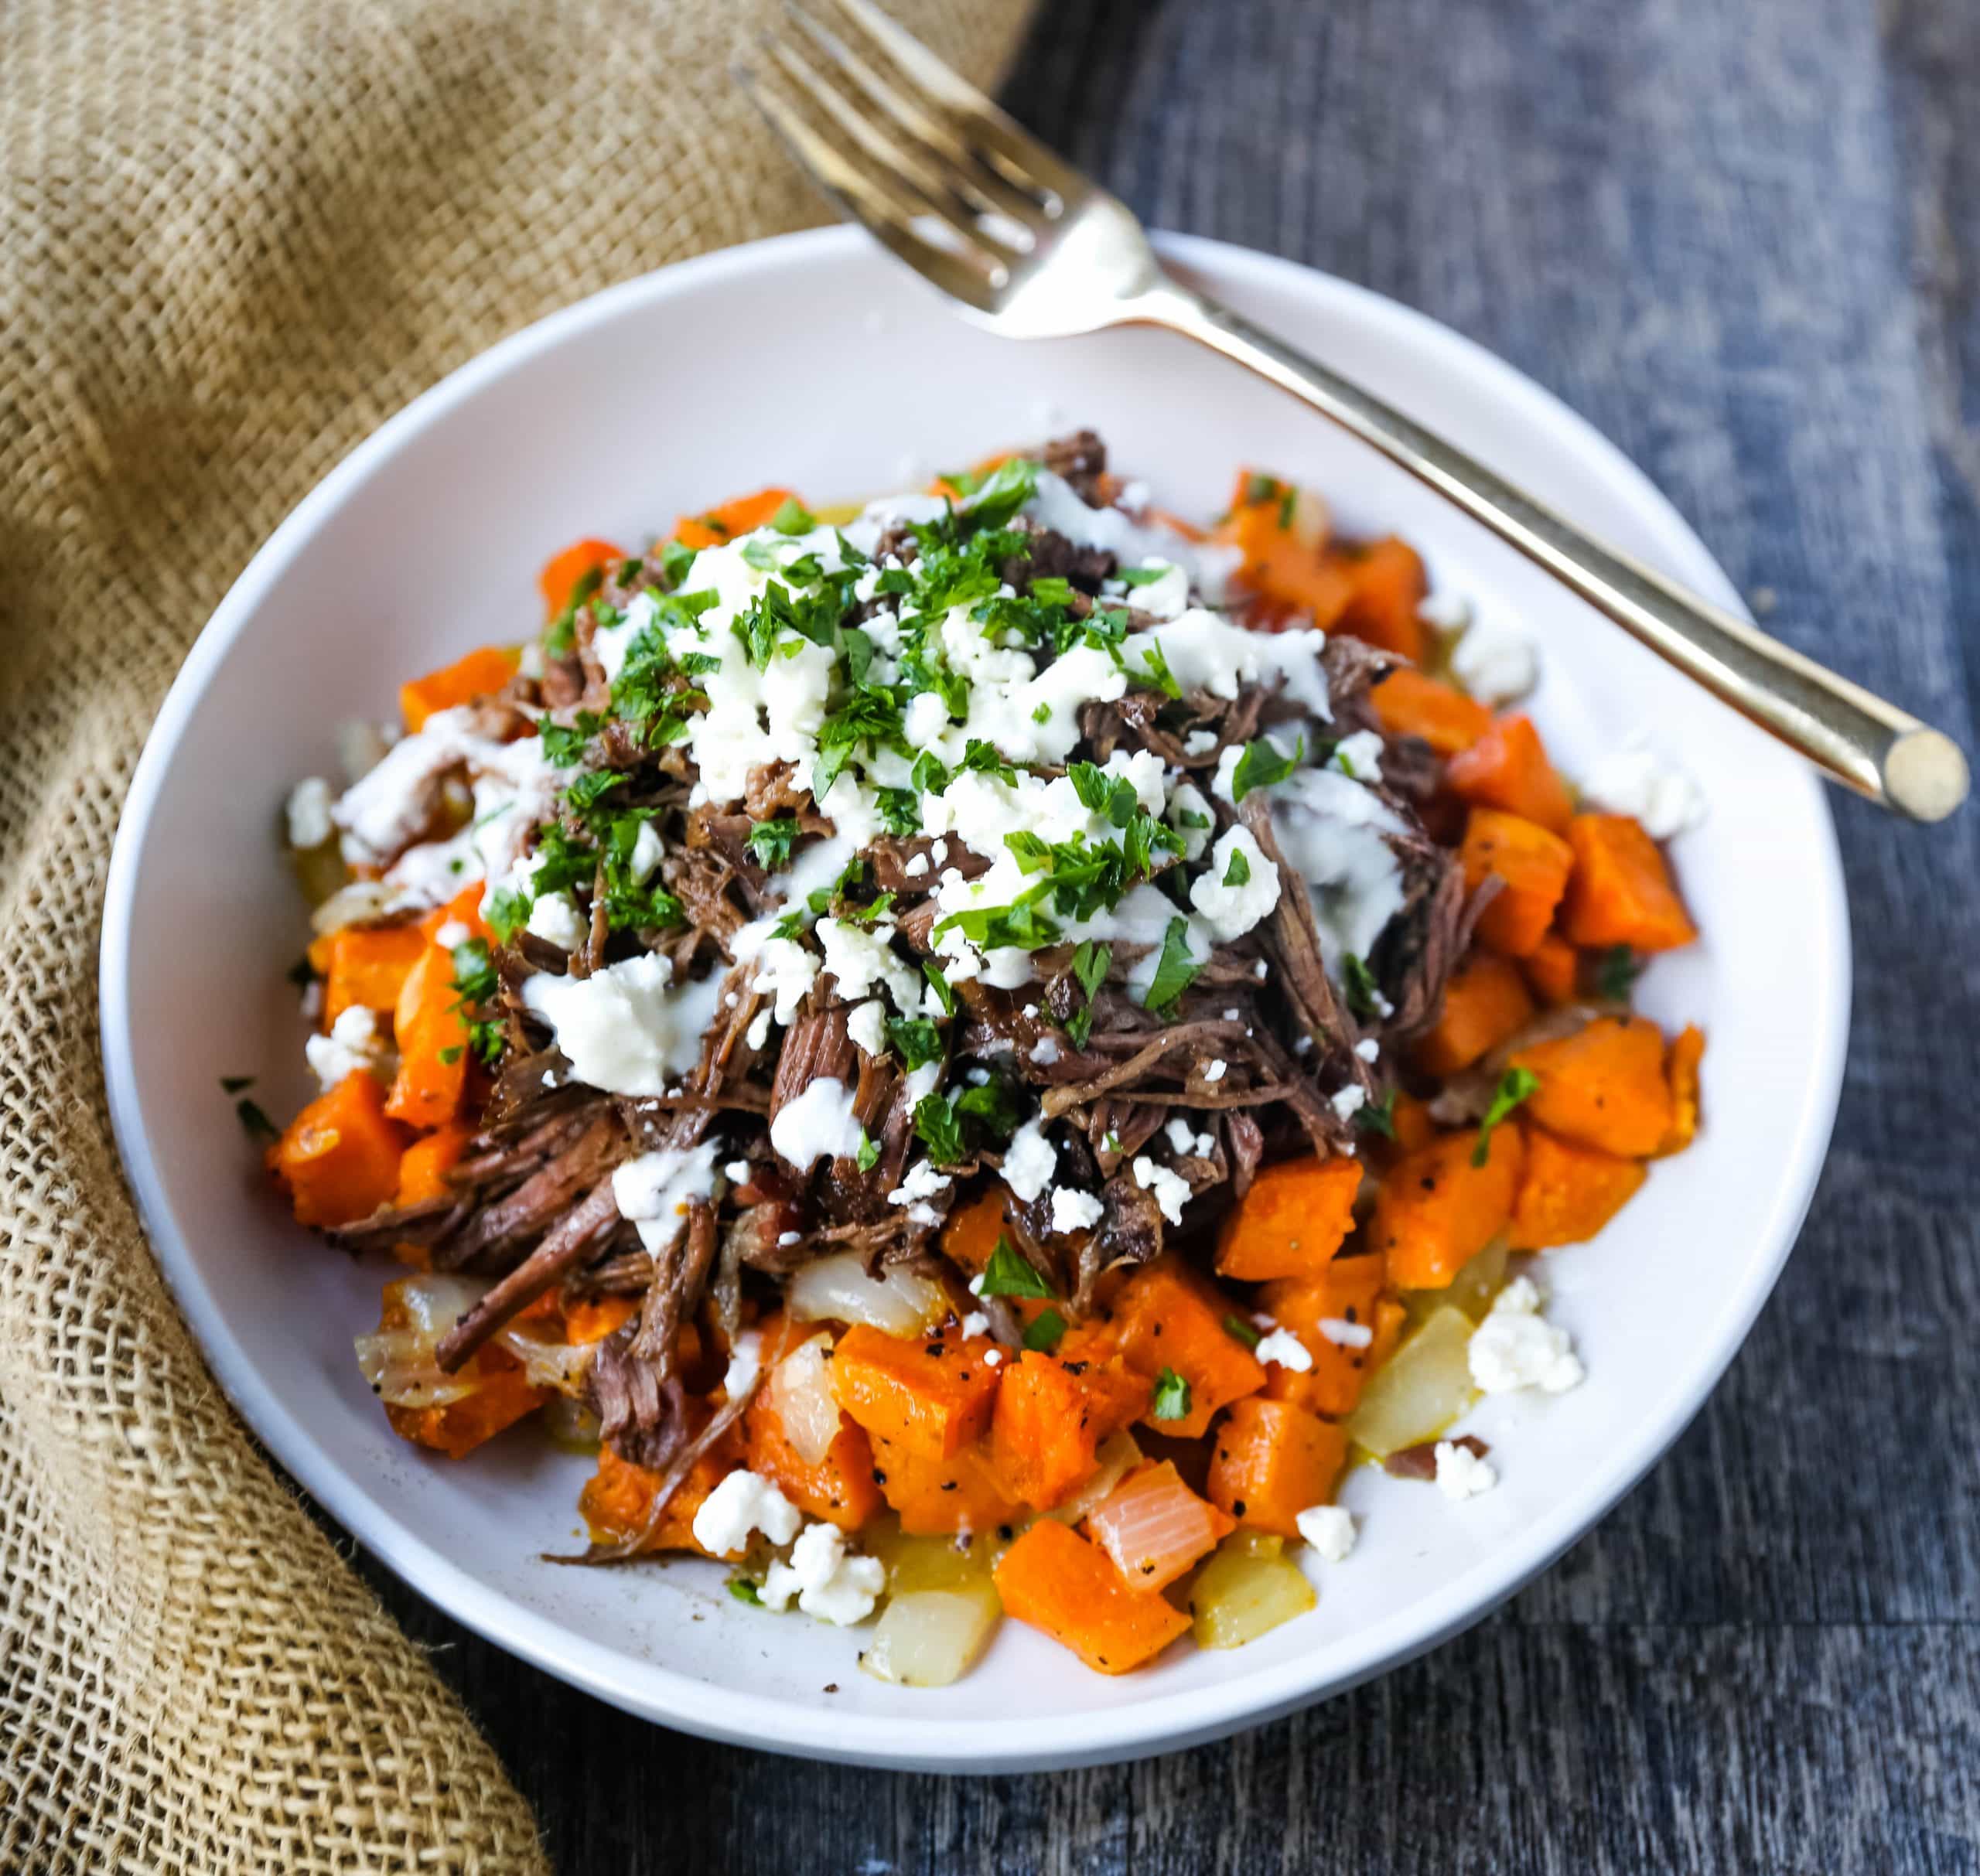 Braised Beef and Sweet Potato Hash Bowl. Tender braised beef on top of a sweet potato onion hash and topped with feta cheese and herbs. www.modernhoney.com #bowl #bowls #dinner